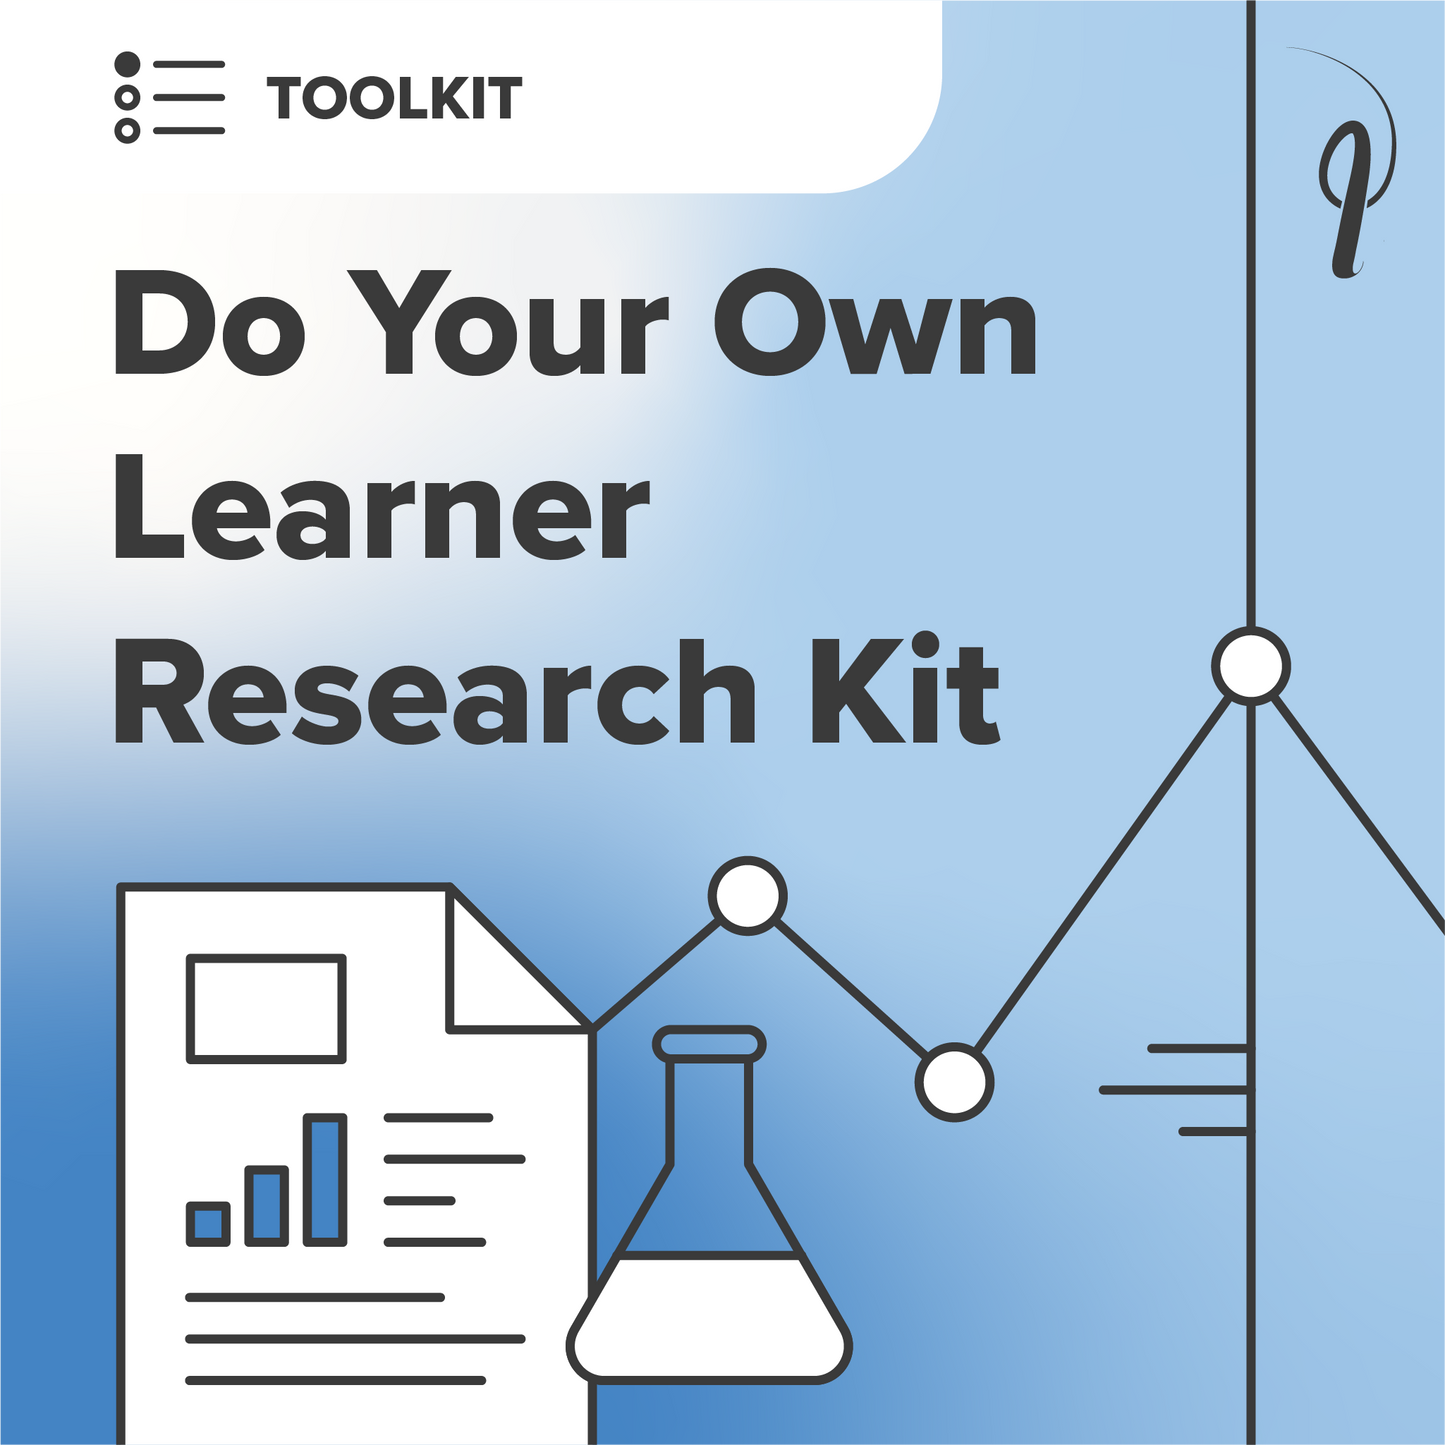 Do Your Own Learner Research Kit